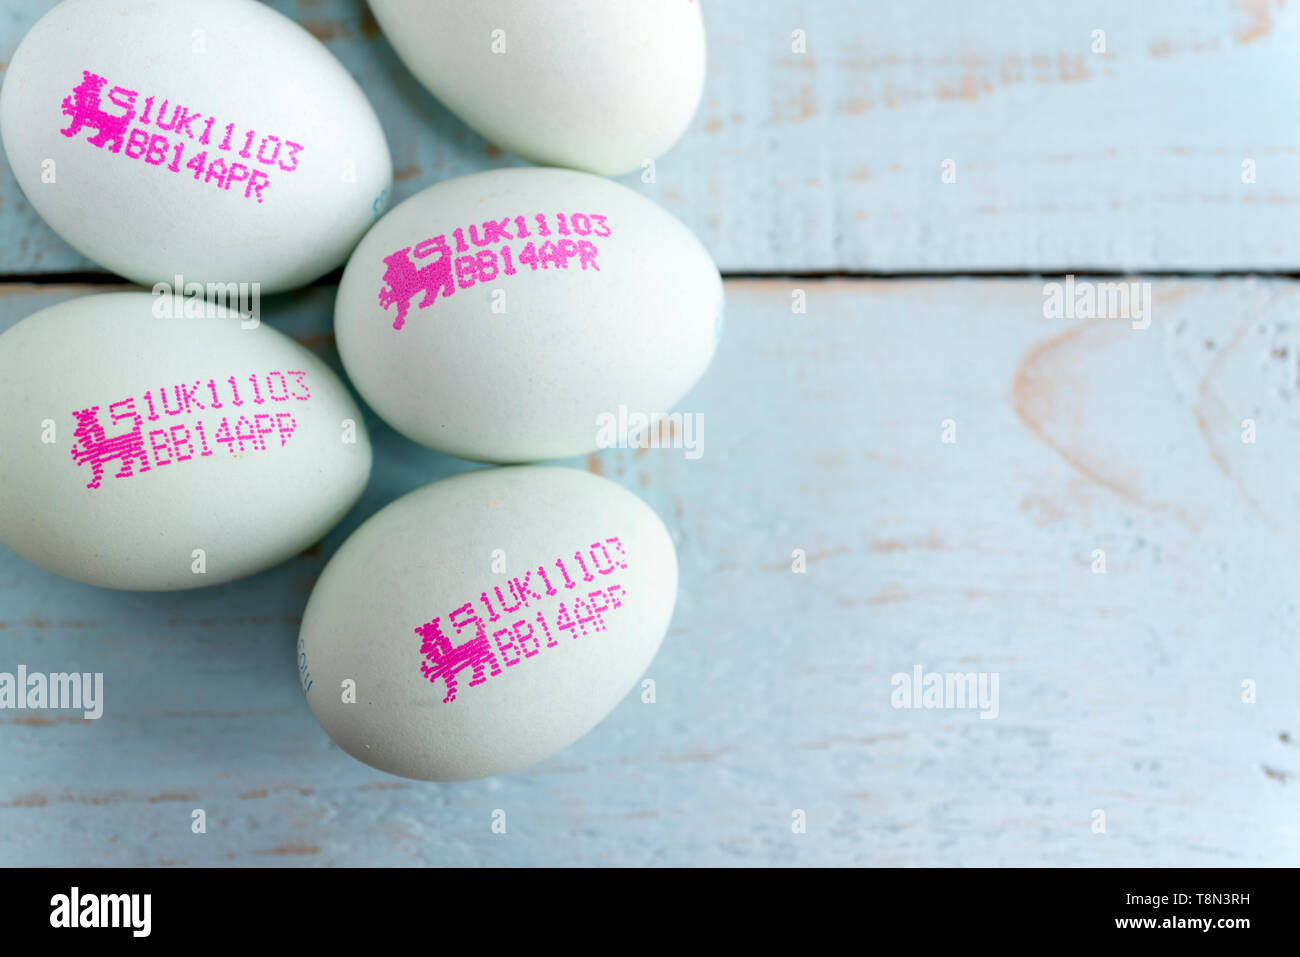 'British Blue' eggs, showing the British Lion Mark, a food safety standard. England, UK. Stock Photo